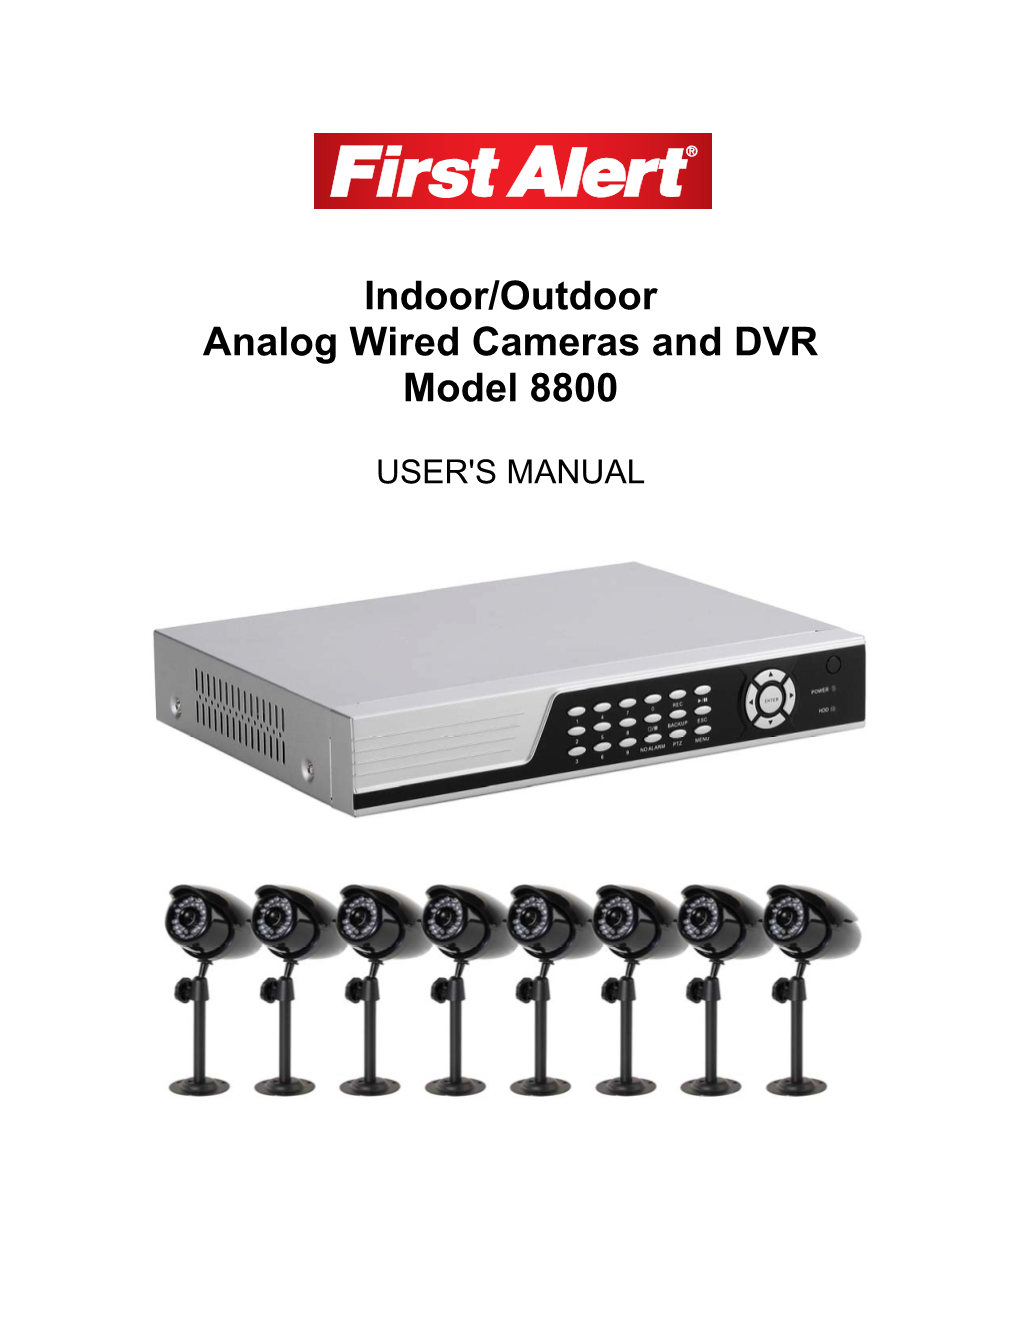 Indoor/Outdoor Analog Wired Cameras and DVR Model 8800